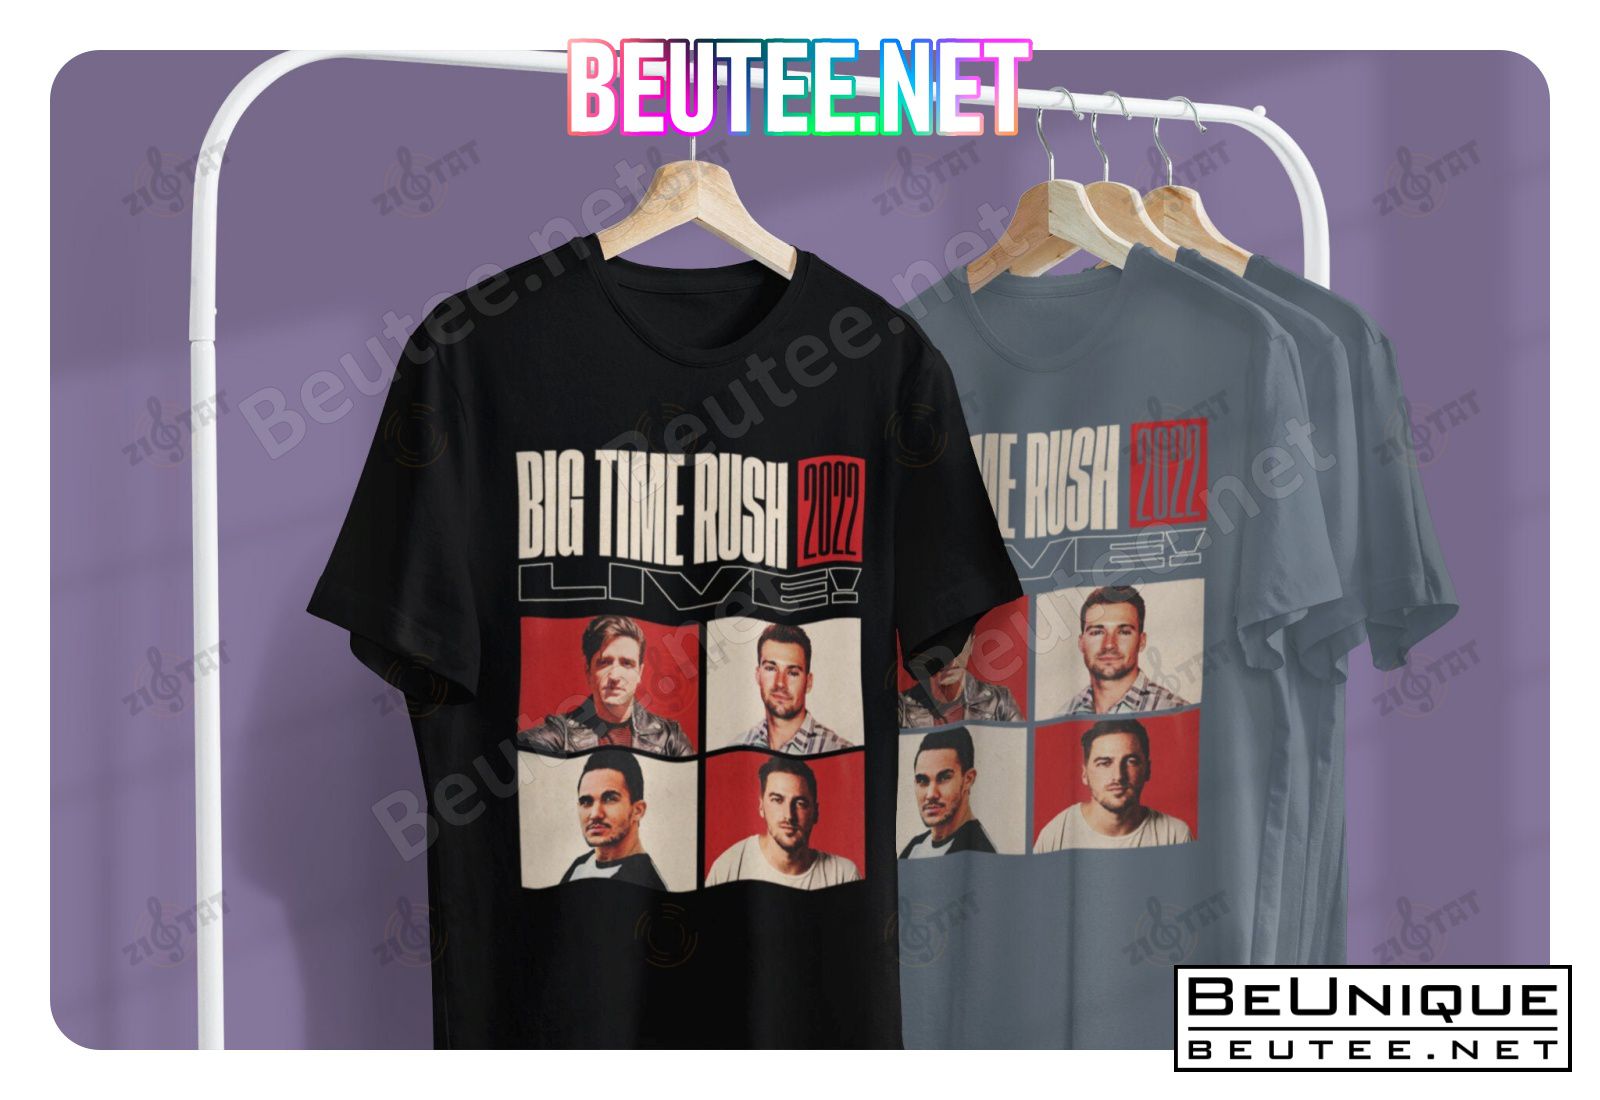 Big Time Rush 2022 Logo And Members Live Concert Music Band Forever Tour 2022 Shirt